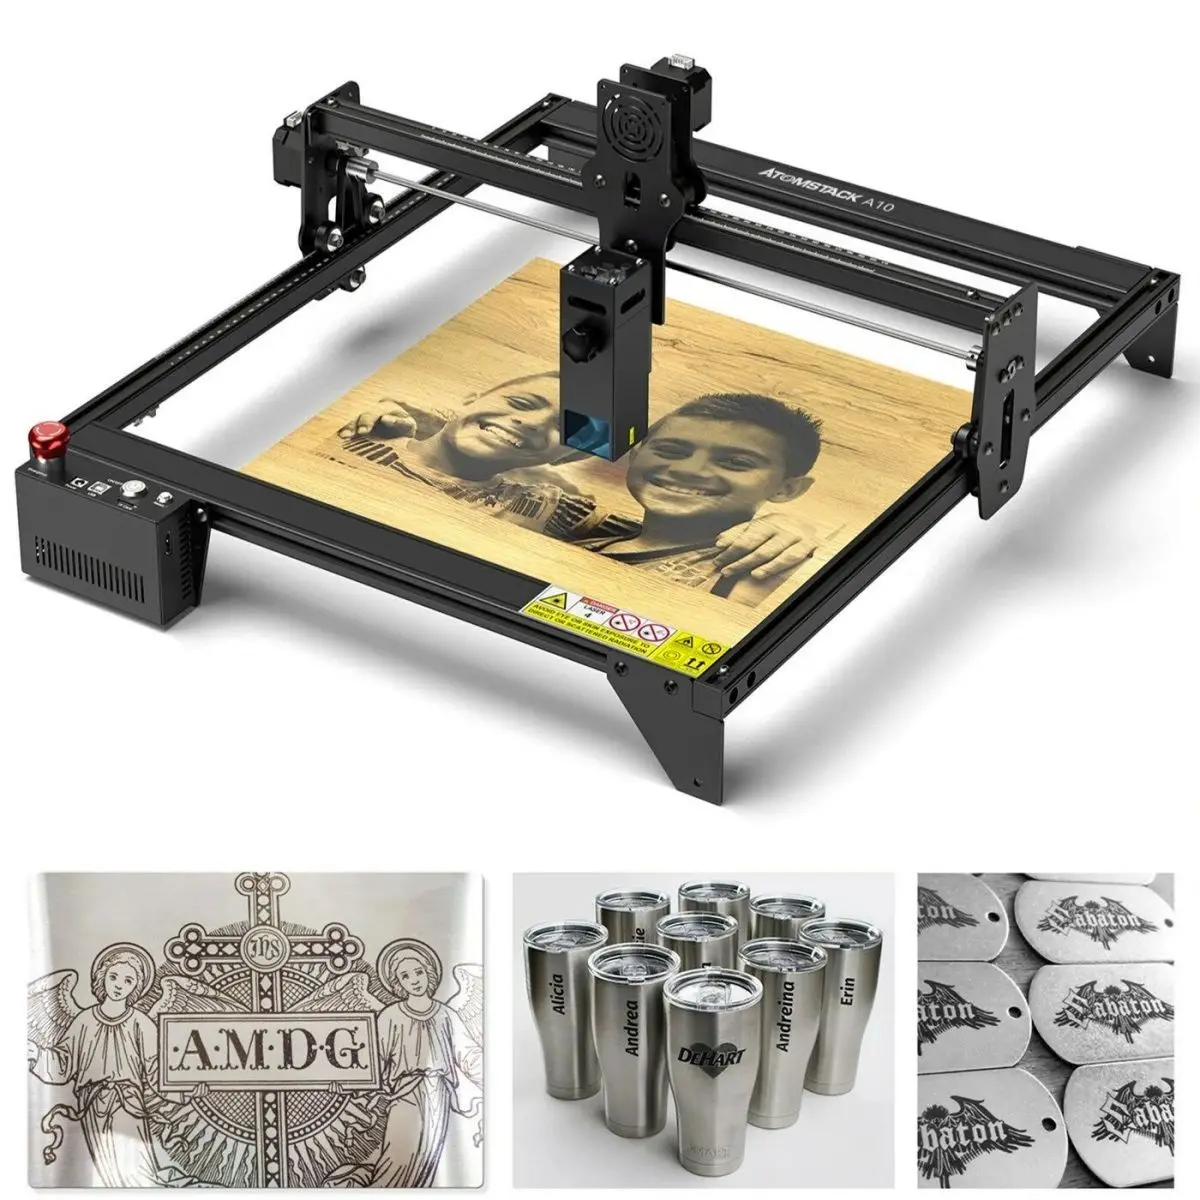 ATOMSTACK A10 150W Effect CNC Laser Engraver Cutter Engraving Cutting Metal Arcylic Wood Leather 10W Laser Output Expansion Kit sculpfun engraver engraving area expansion kit for s6 s6pro s9 laser engraver size 410x950mm full metal structure quick assembly